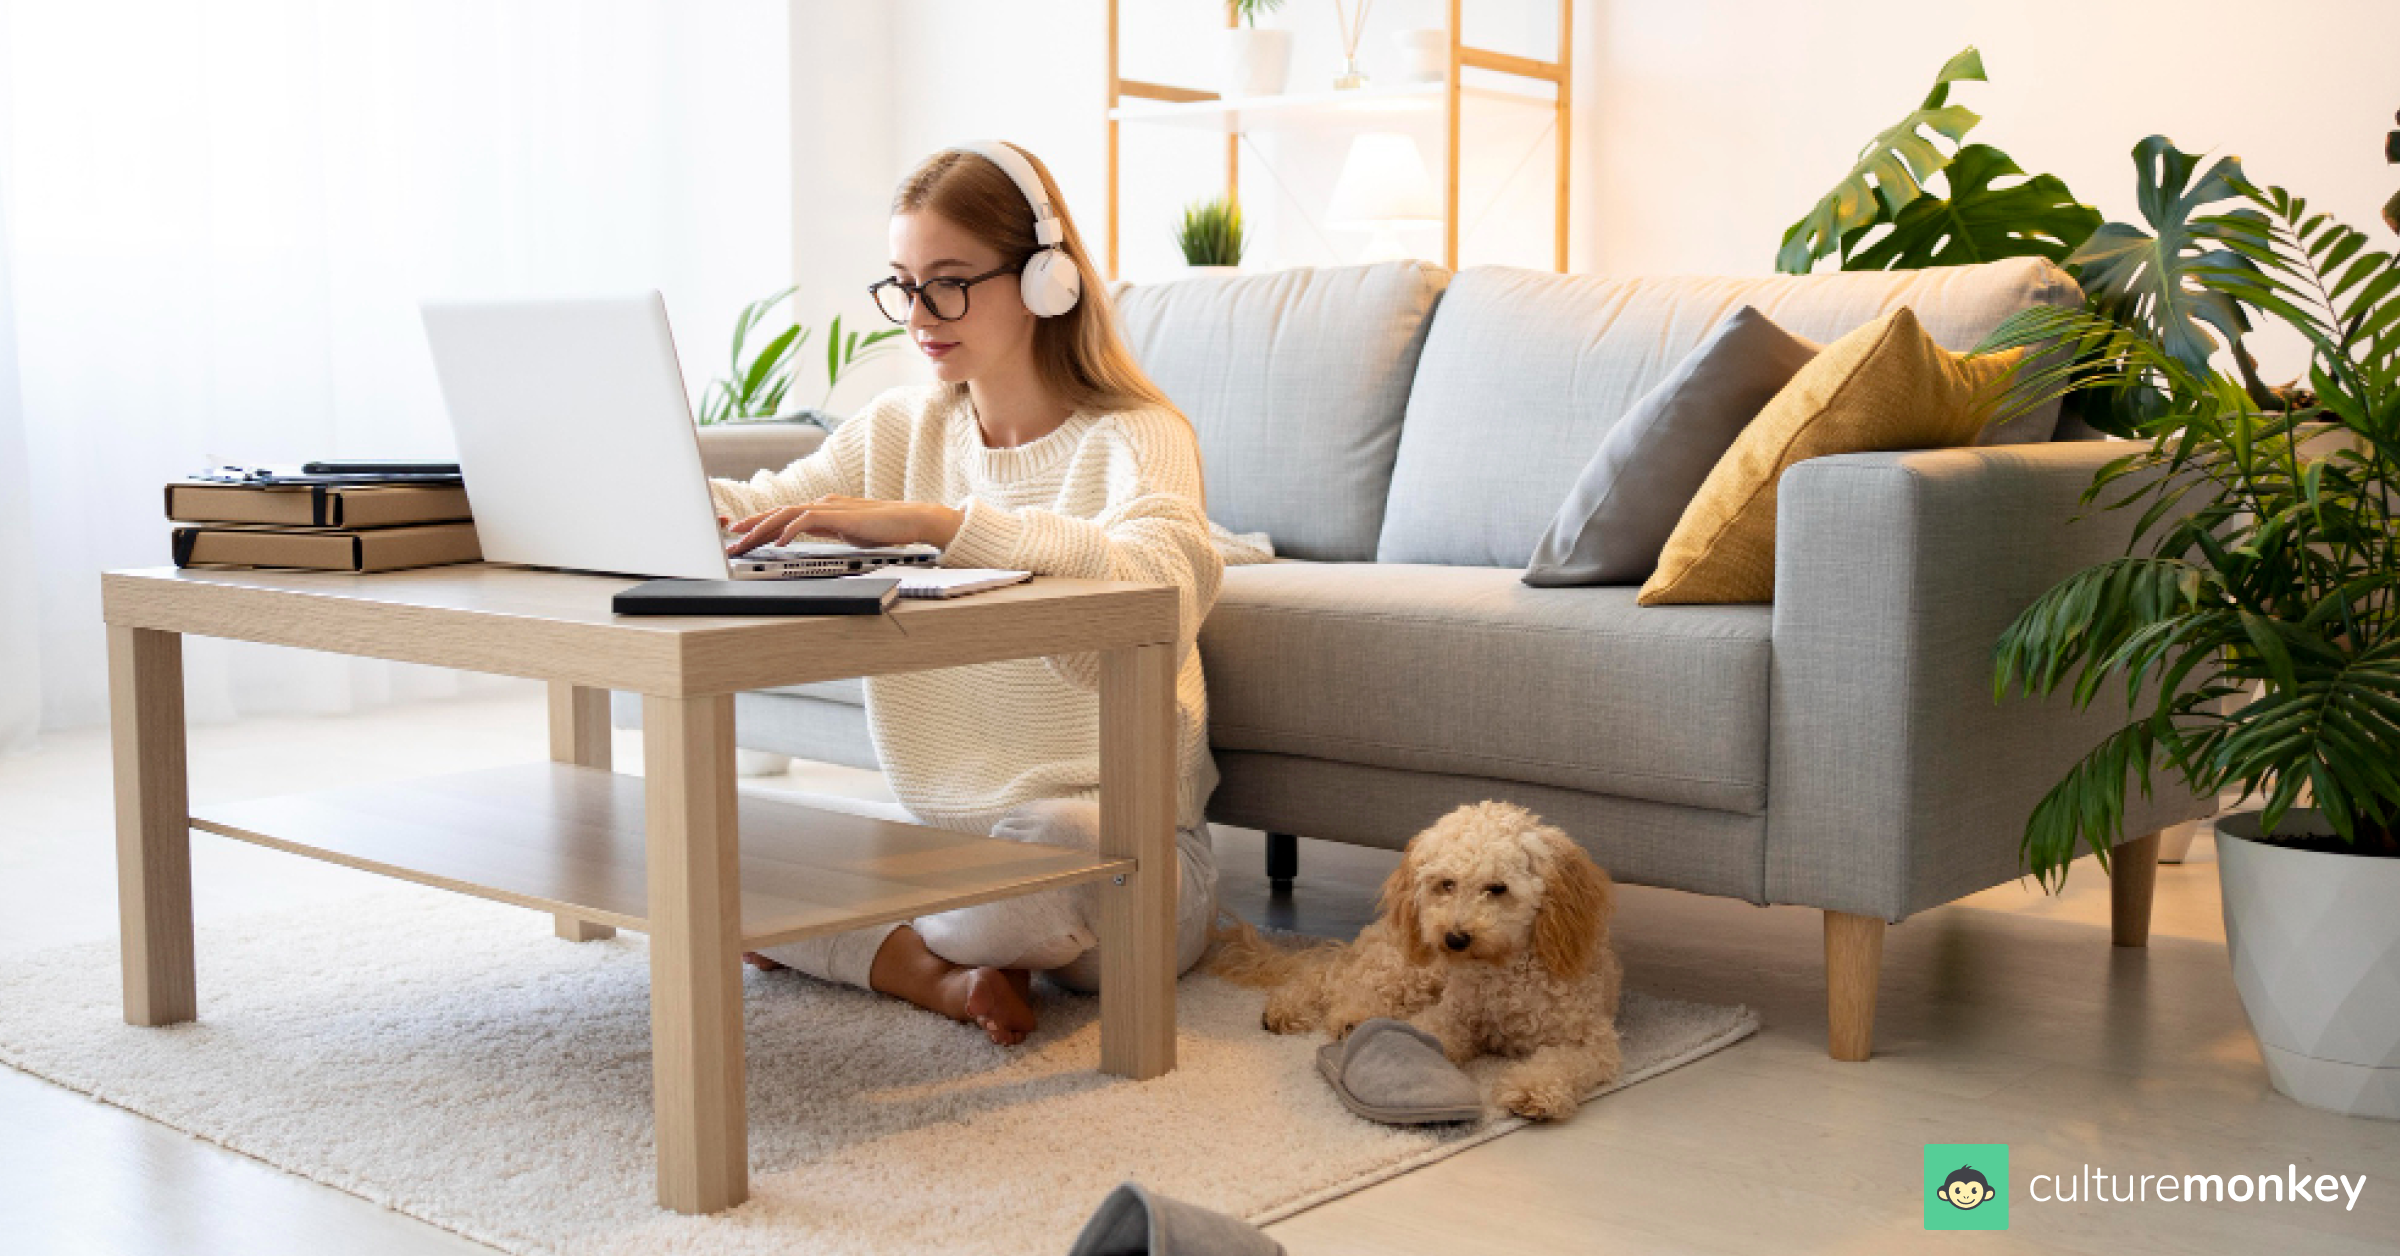 Employee is working remotely on the lap, with a dog sitting on the side